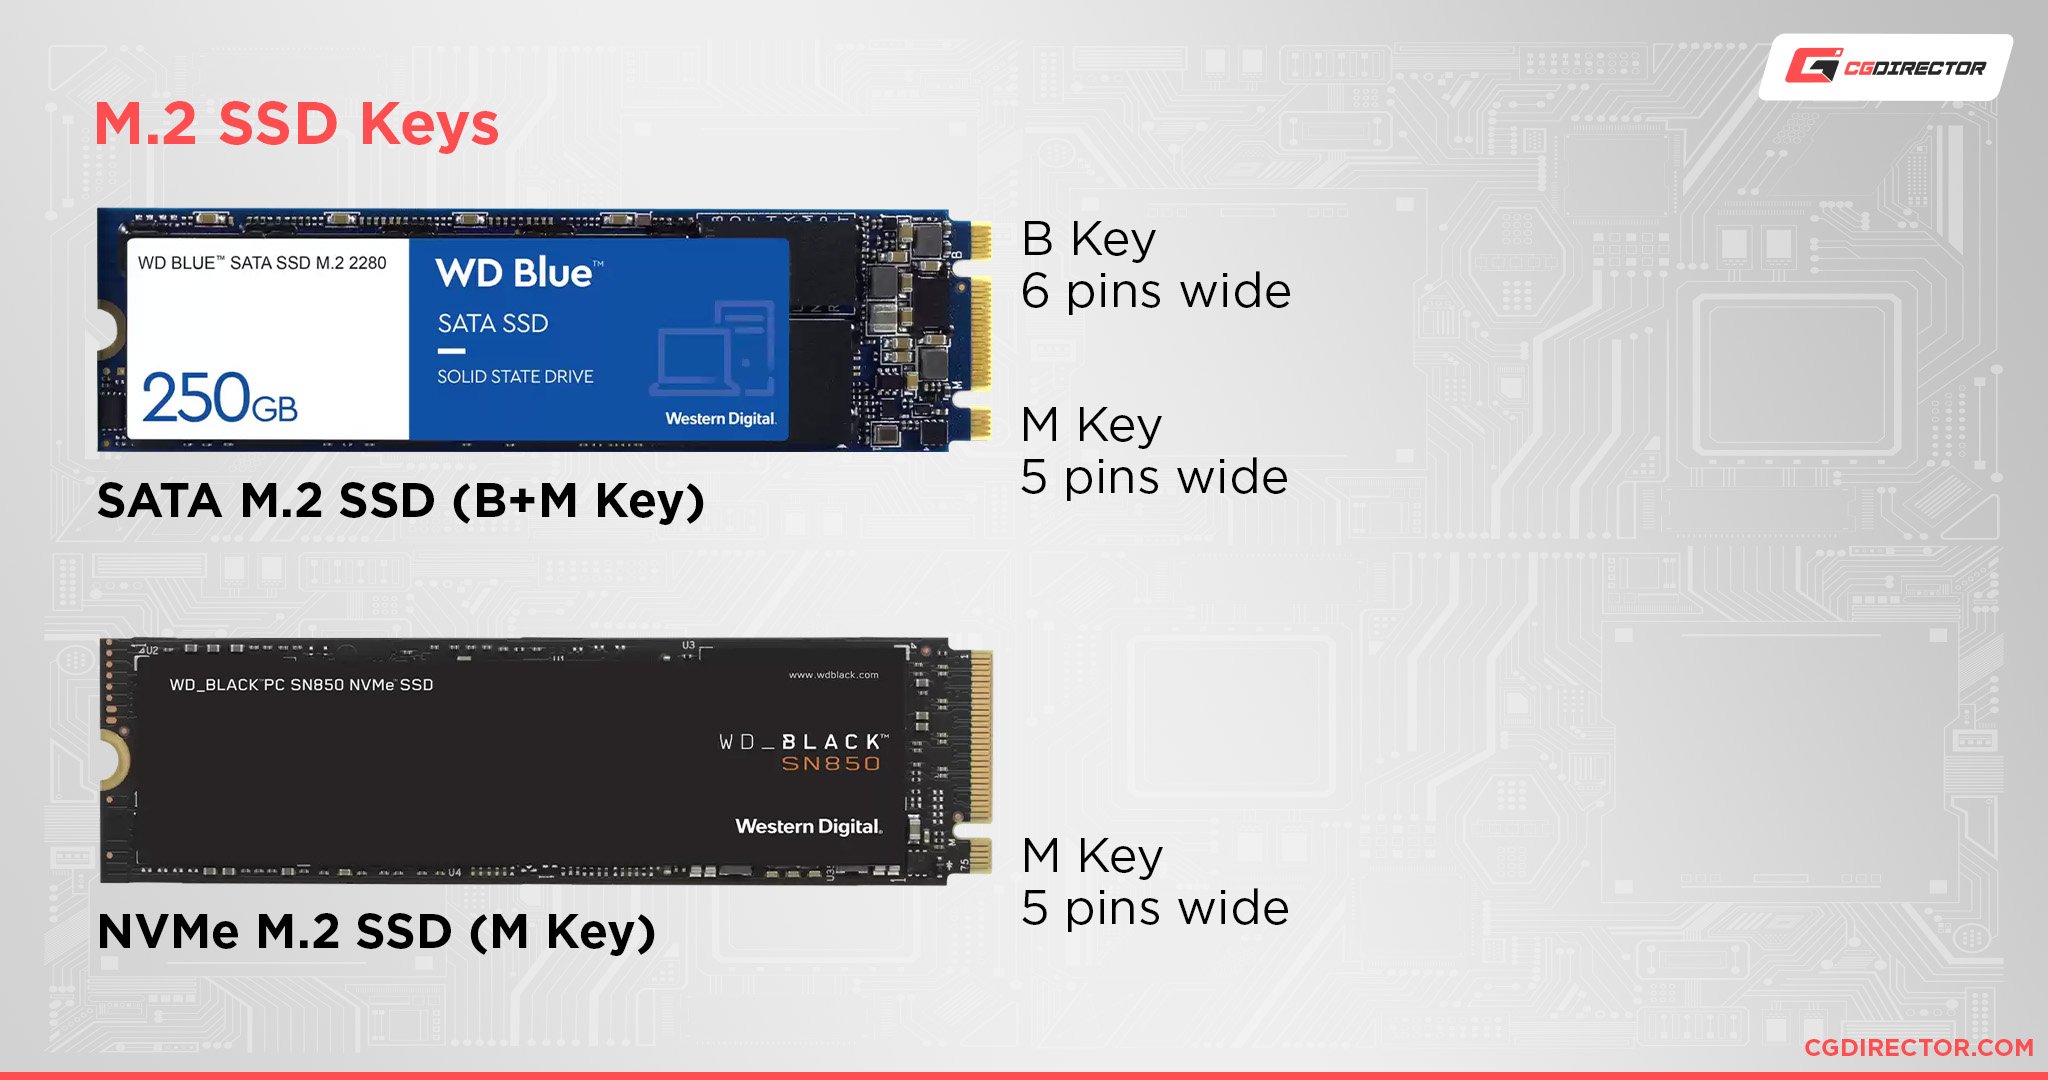 NVMe vs. SATA vs. M.2 SSD Explained: What's the Differences?